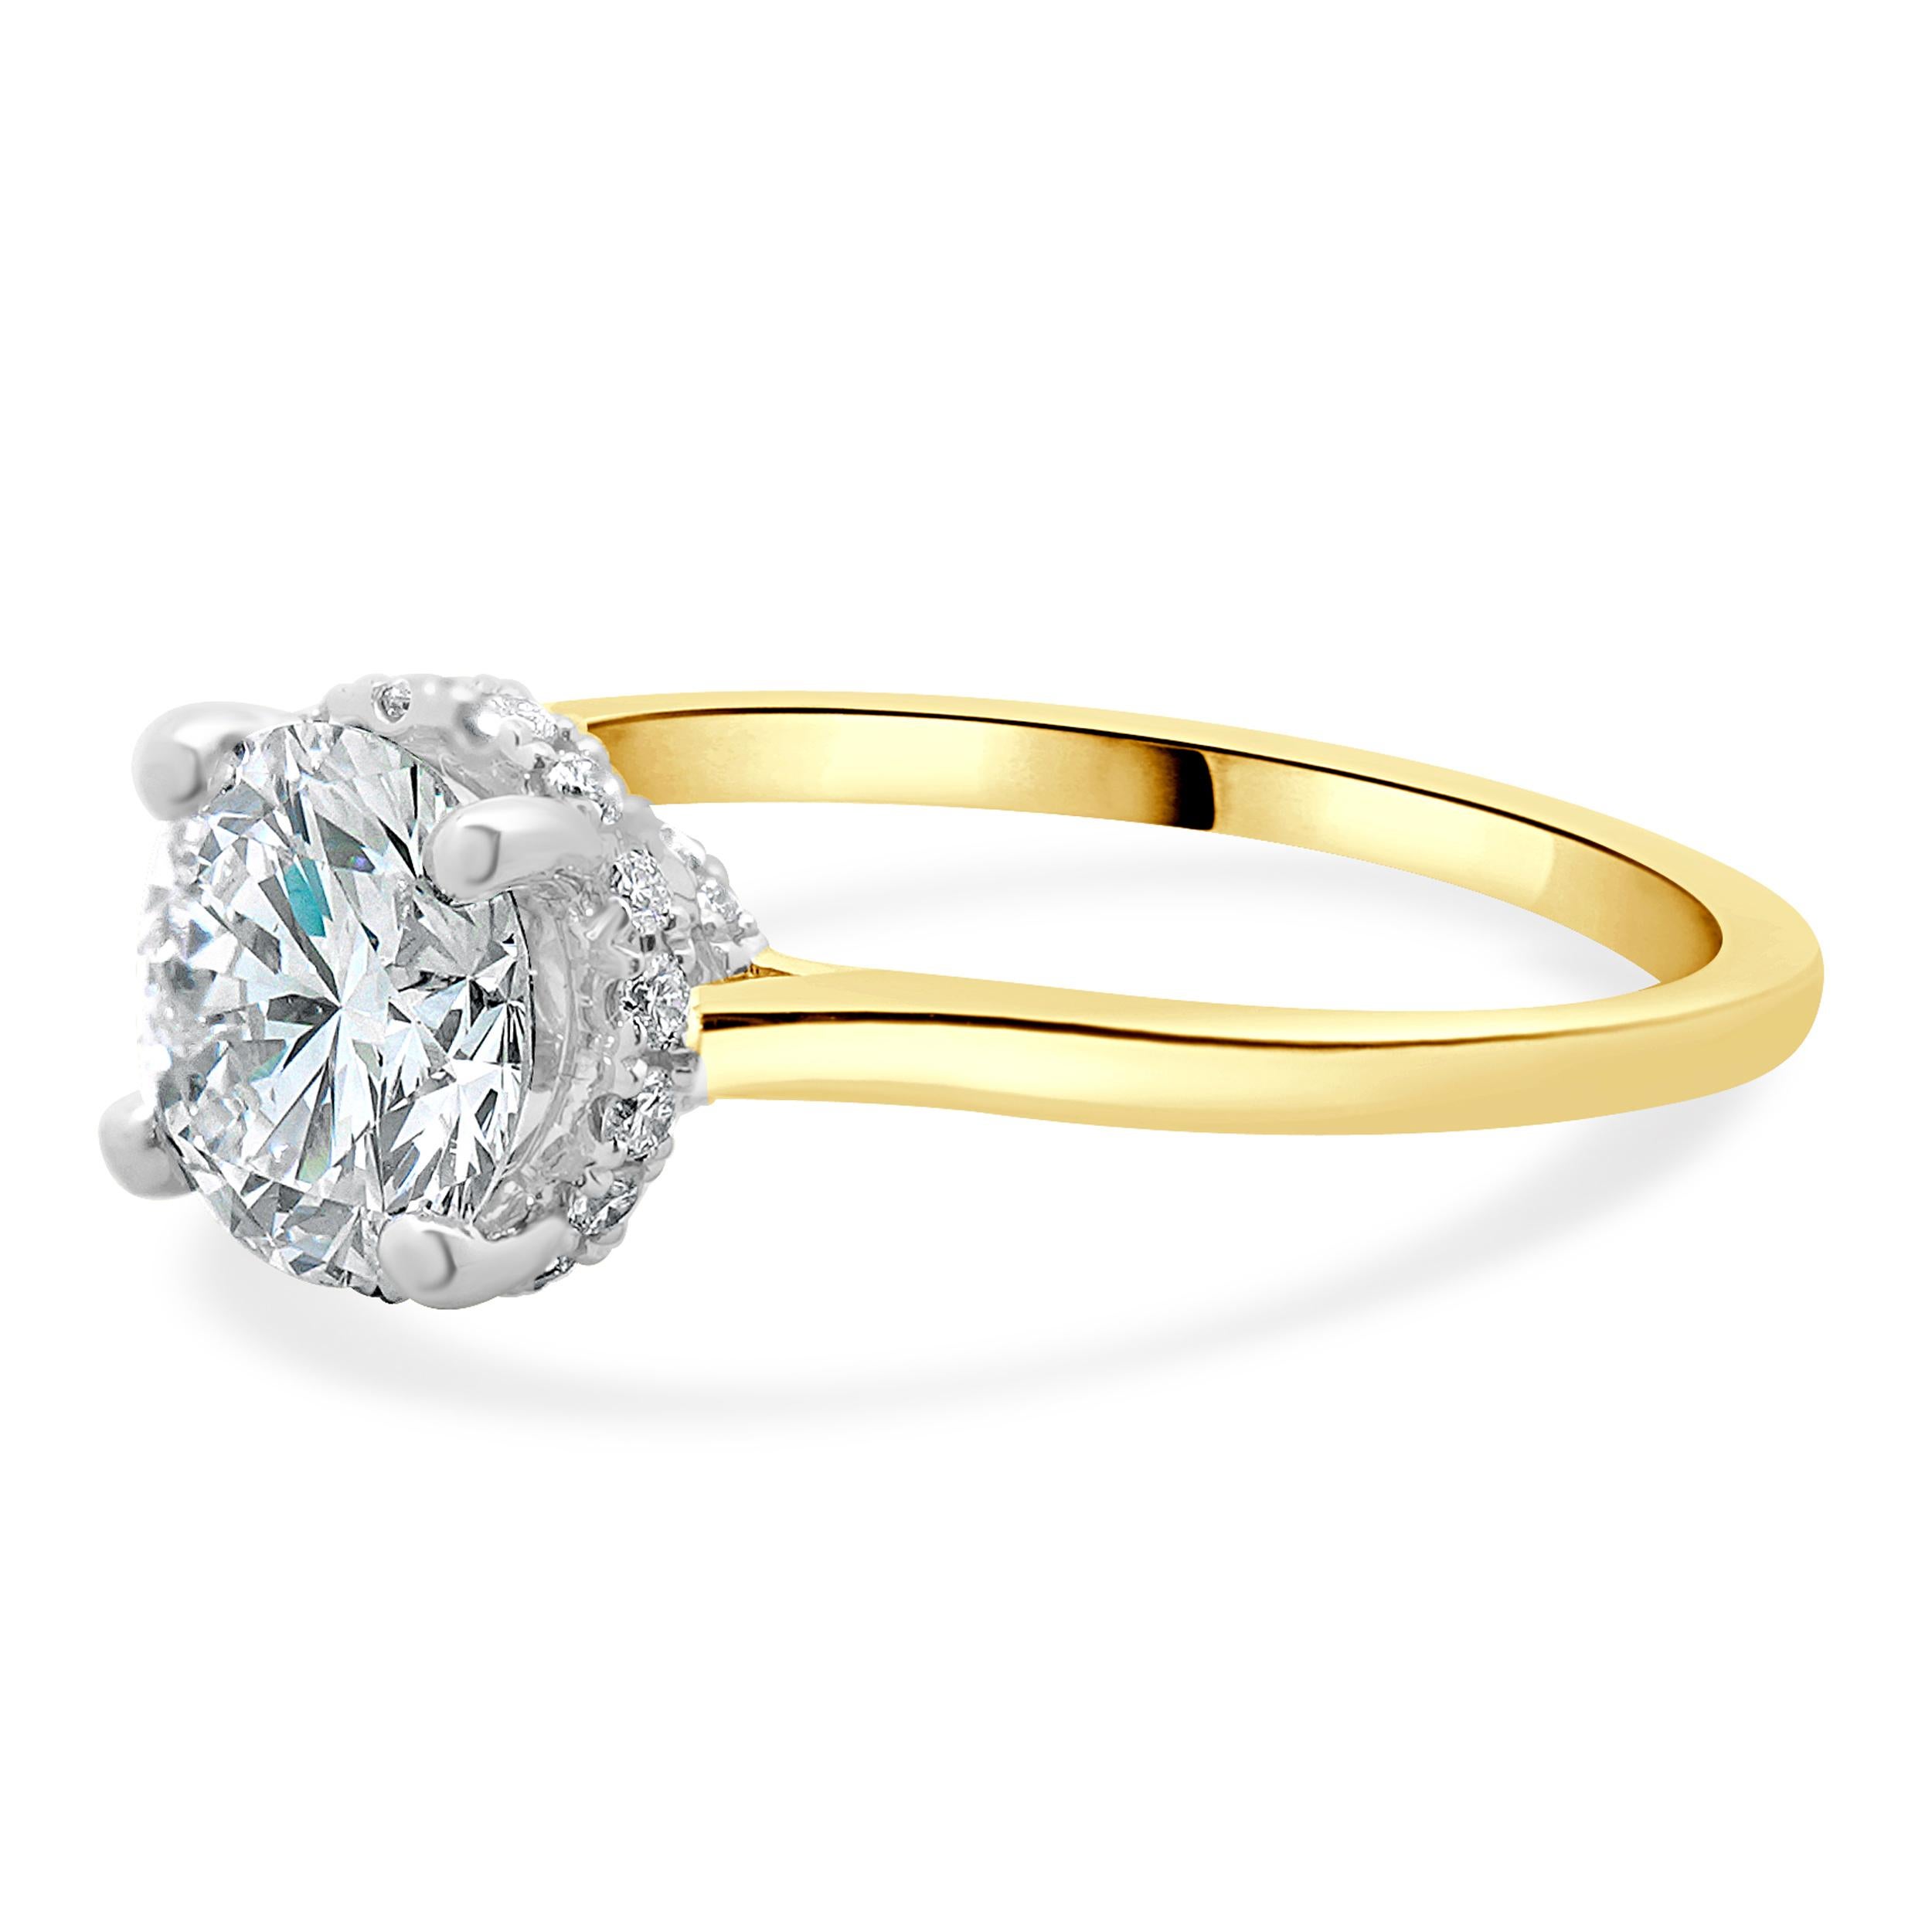 Designer: custom
Material: 14K Two Tone
Diamond: 1 round brilliant cut = 1.68ct
Color: D
Clarity: SI1
Diamond:  round brilliant = 0.25cttw
Color: G
Clarity: SI1
Ring Size: 6.5 (complimentary sizing available)
Weight: 2.83 grams
